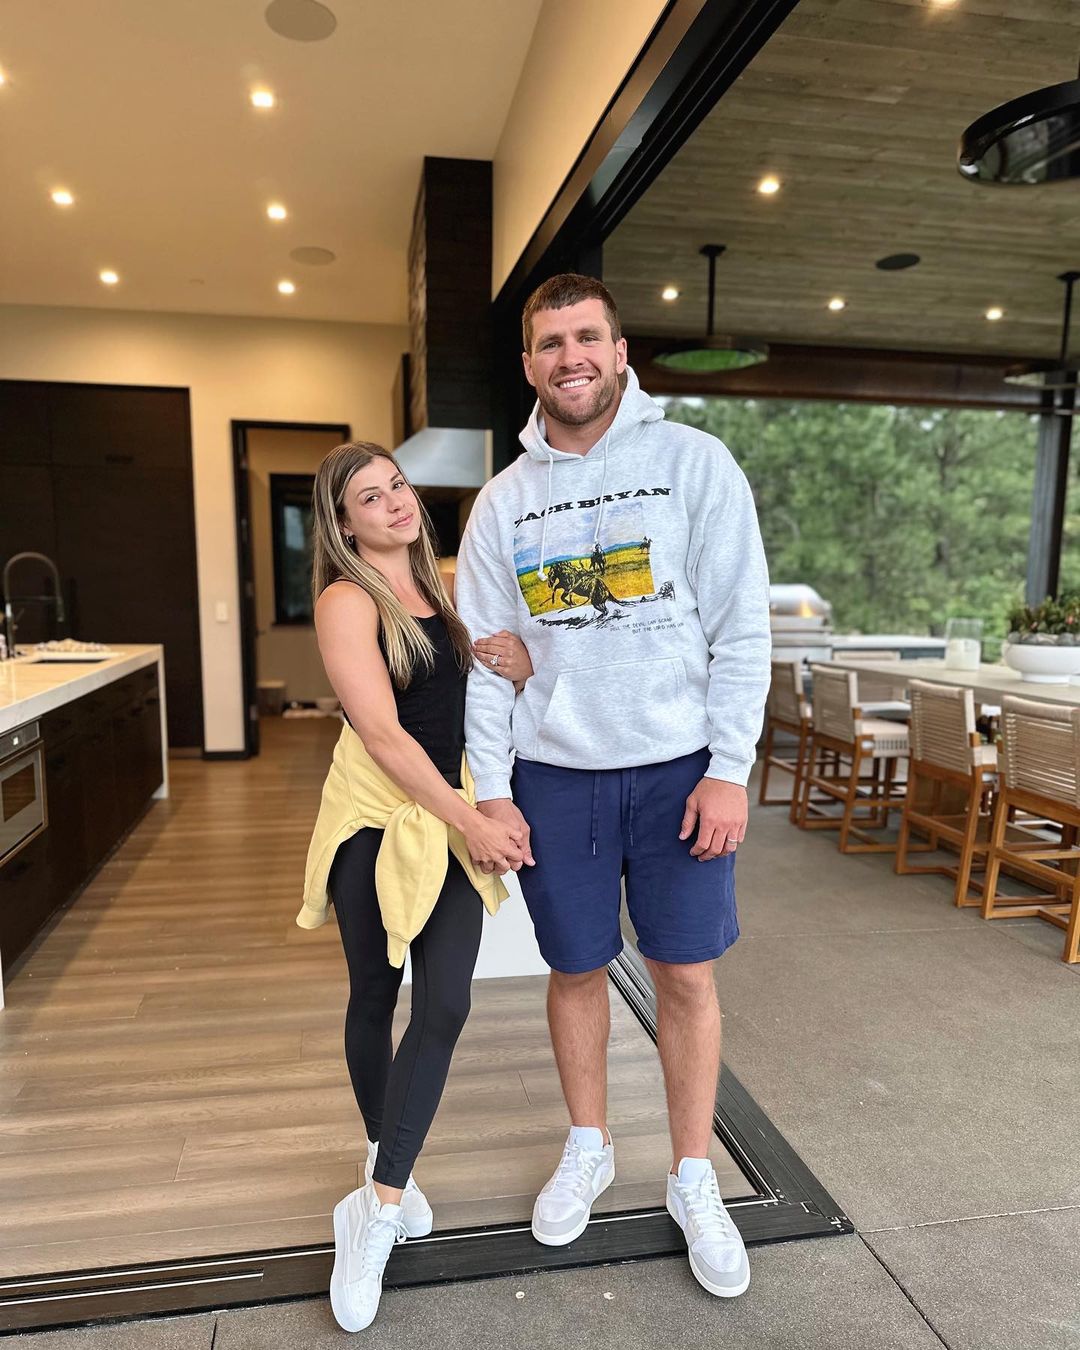 Dani Rhodes shared this picture with her husband on Instagram